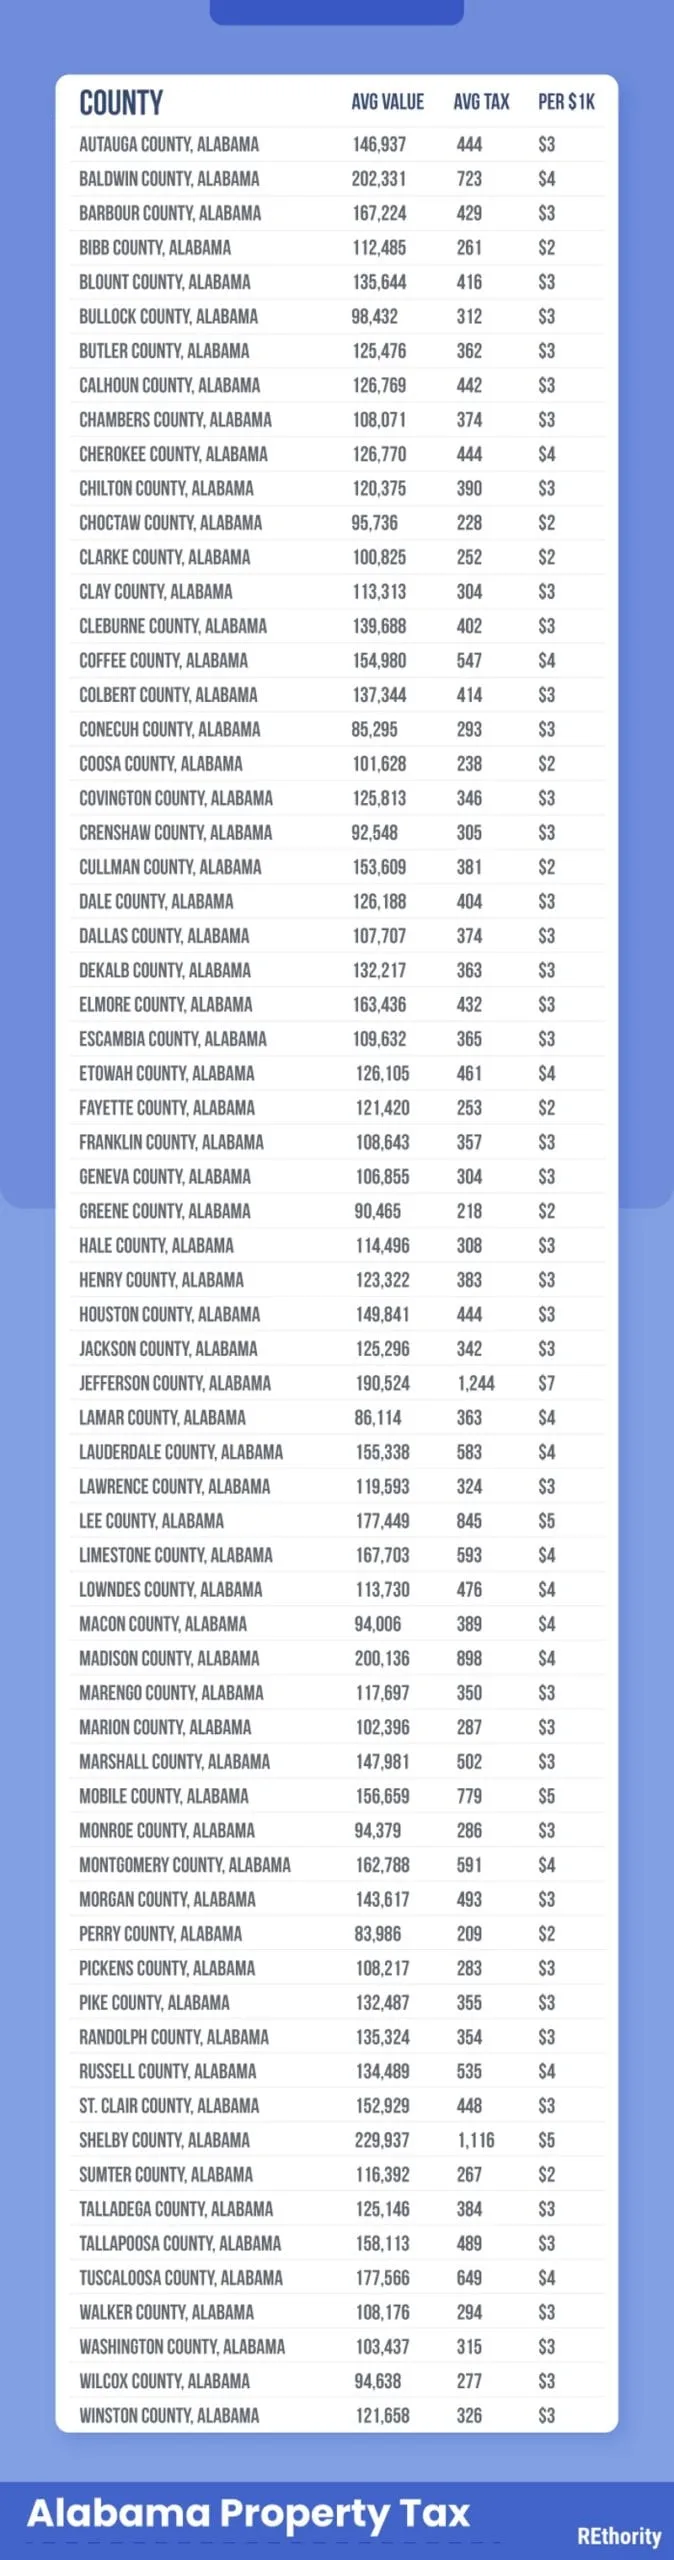 Alabama property tax by county graphic